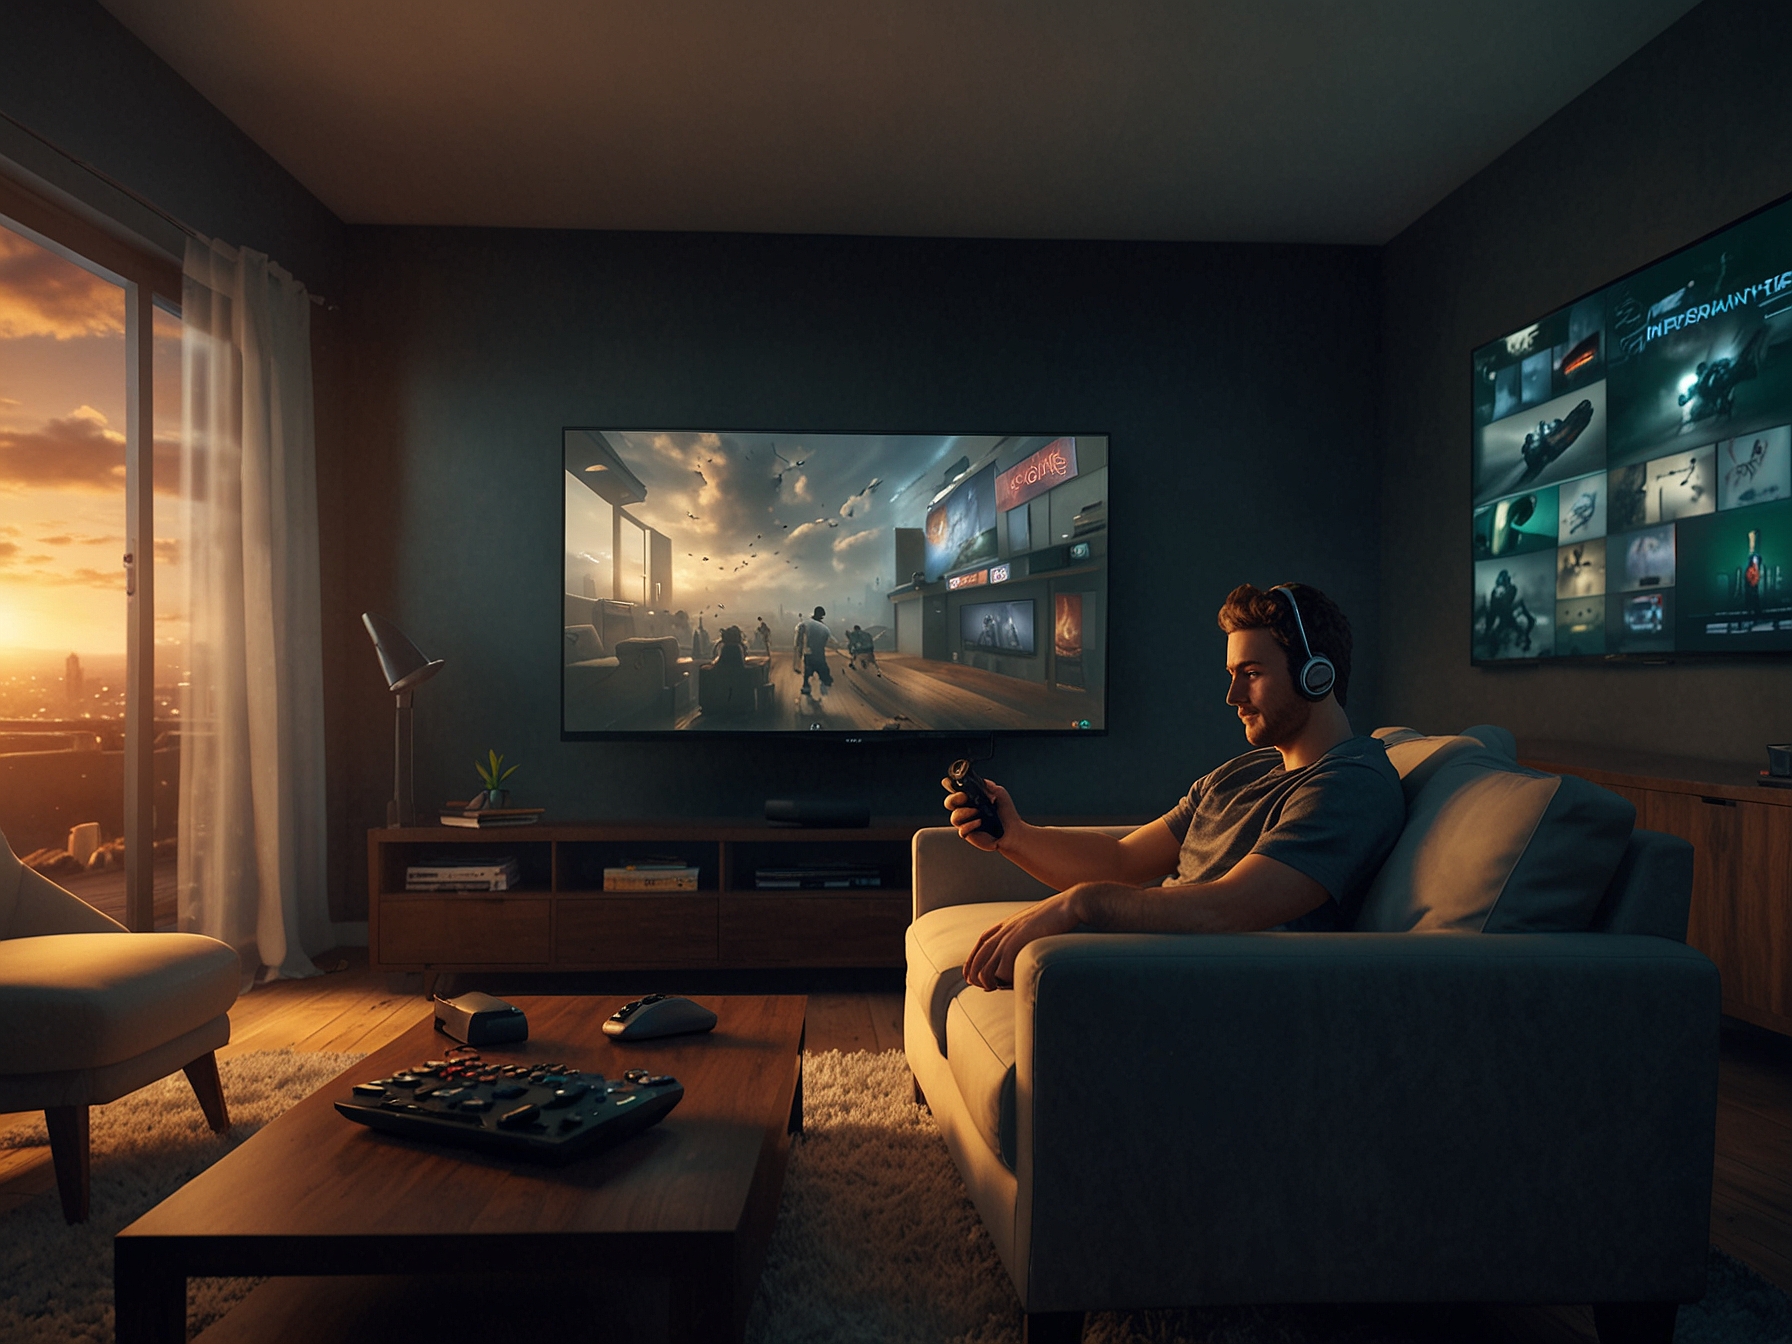 Graphic depicting seamless gaming through cloud streaming, featuring a gamer in a living room playing Xbox Game Pass games on an Amazon Fire TV device.